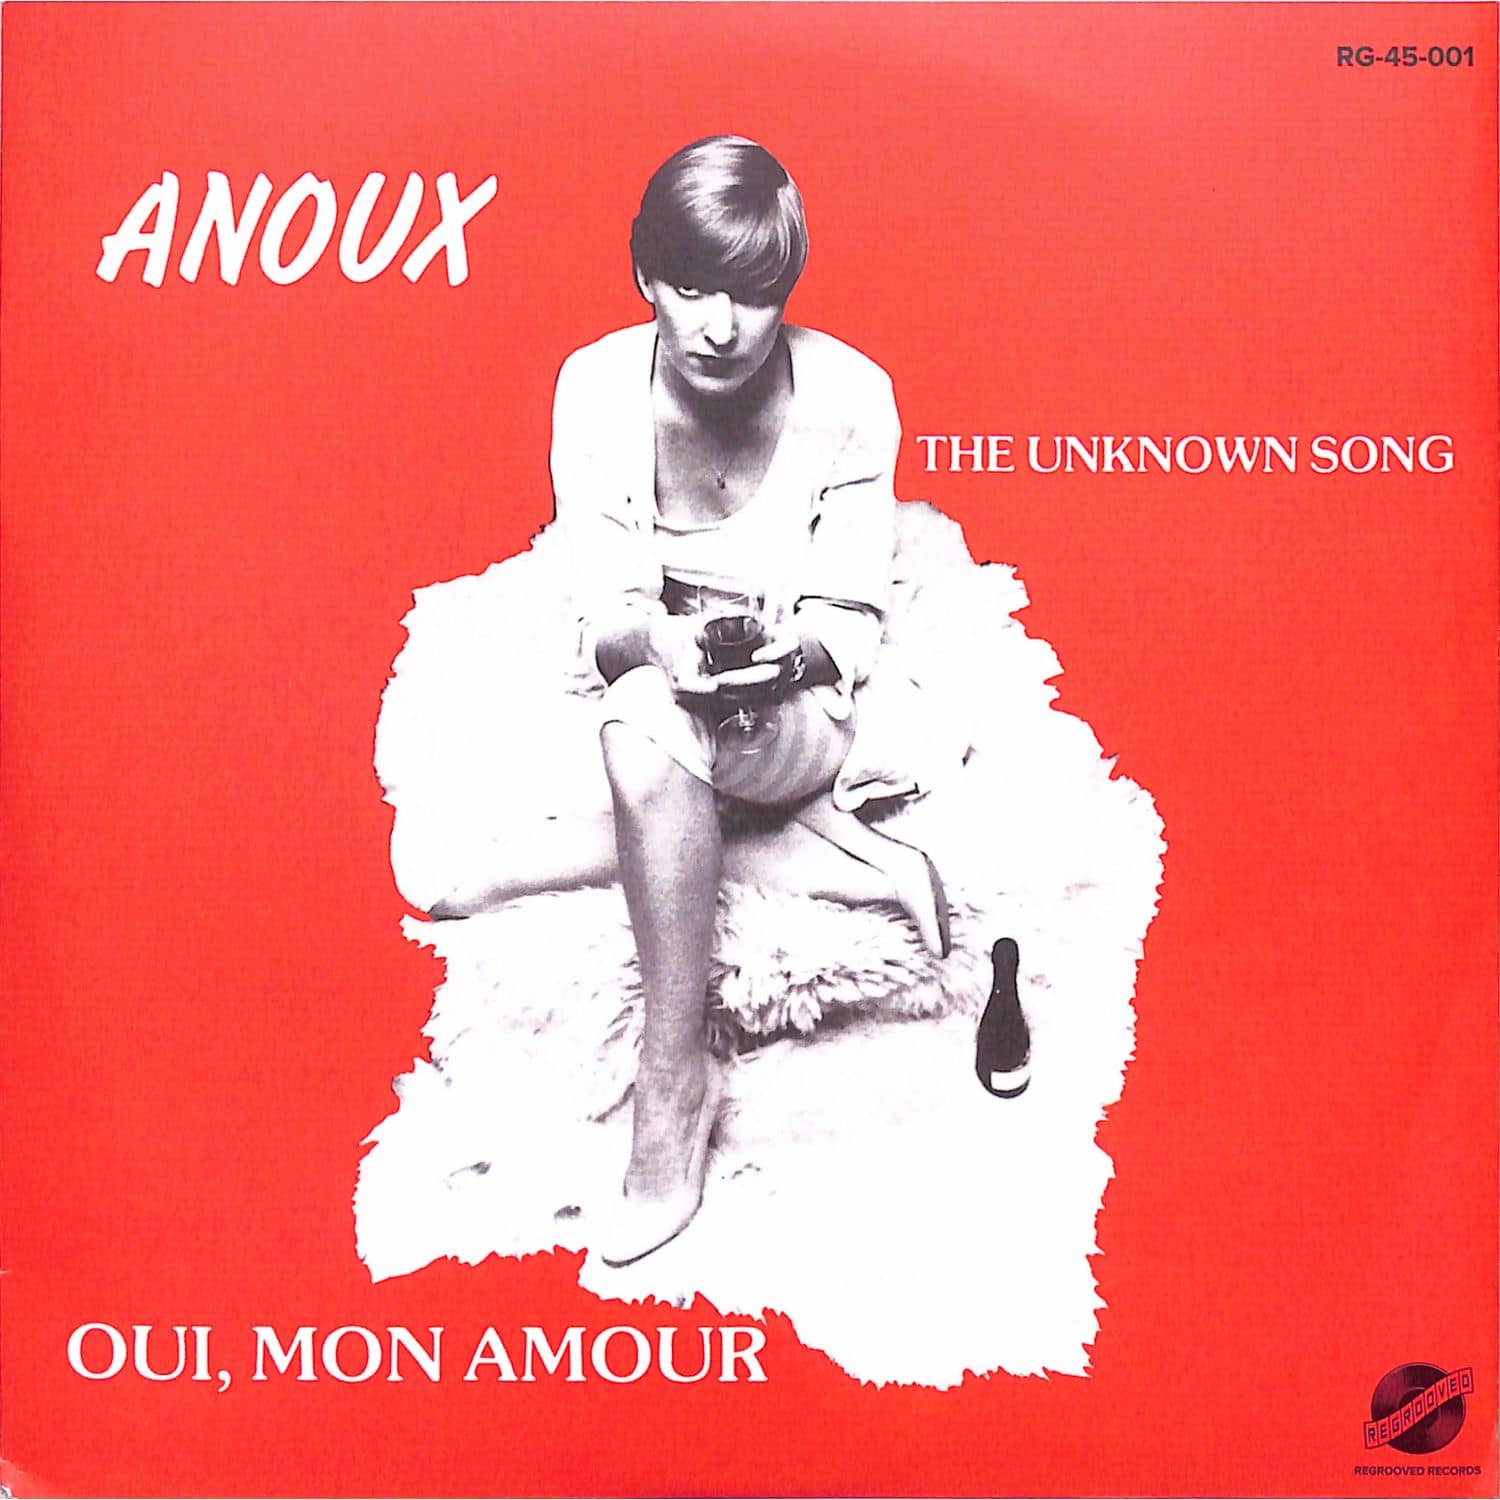 Anoux - THE UNKNOWN SONG / QUI MON AMOUR 